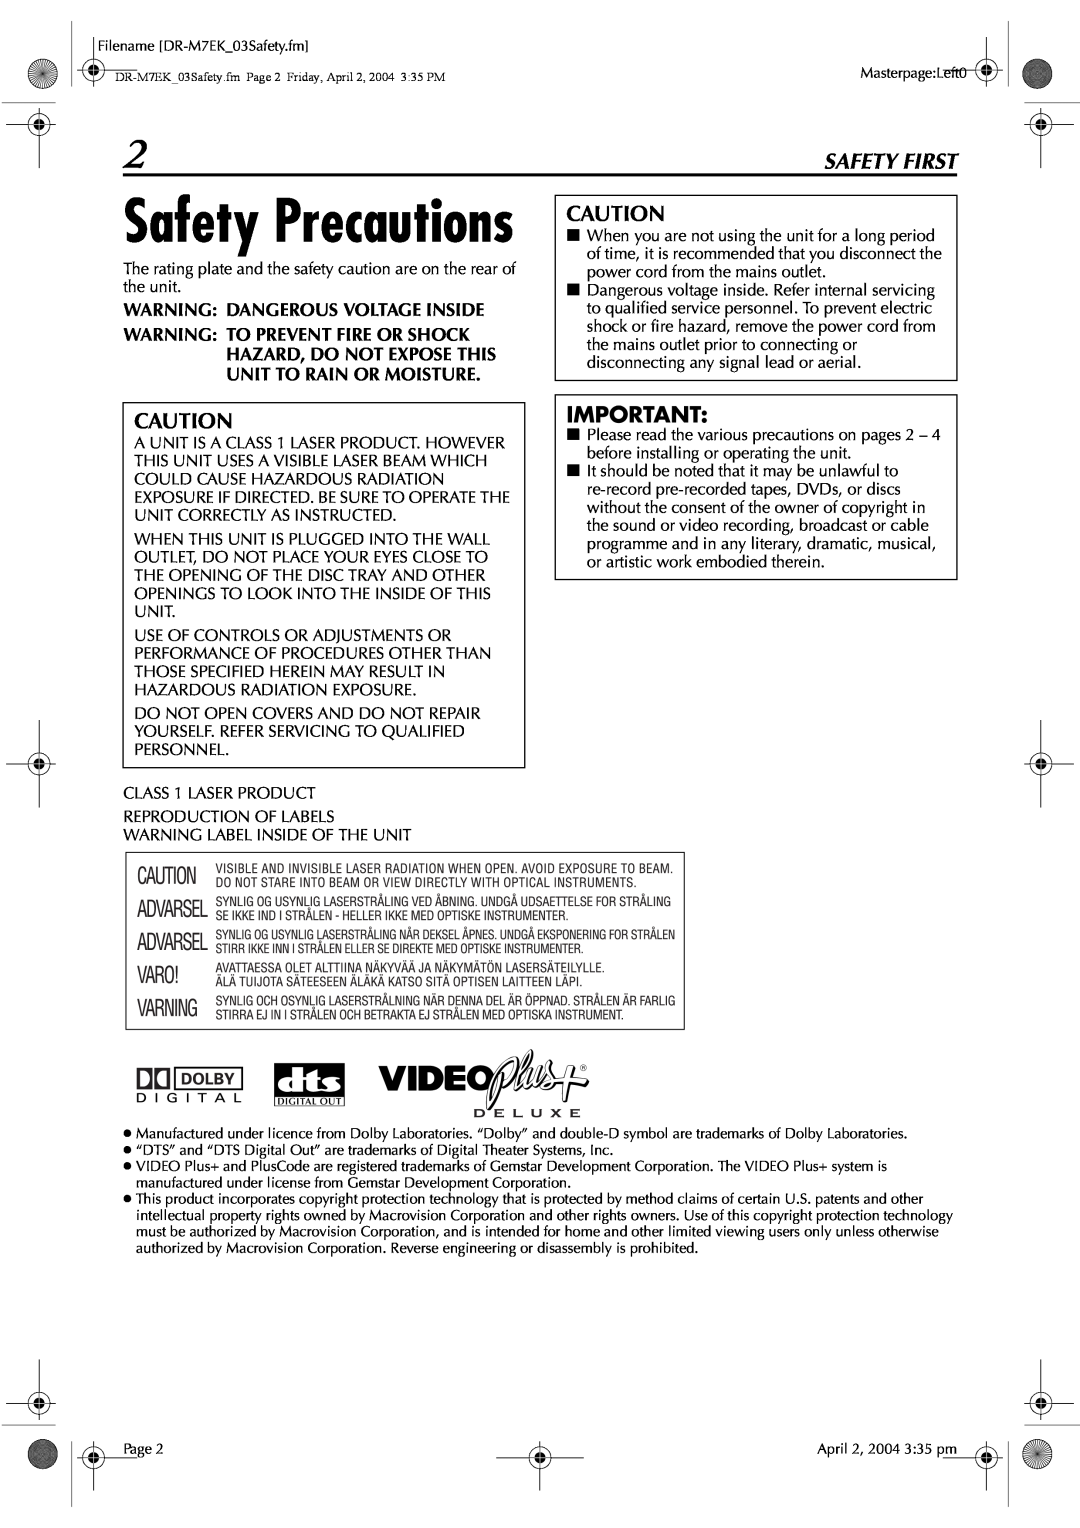 JVC DR-M7S manual Safety Precautions, Safety First, Warning Dangerous Voltage Inside 